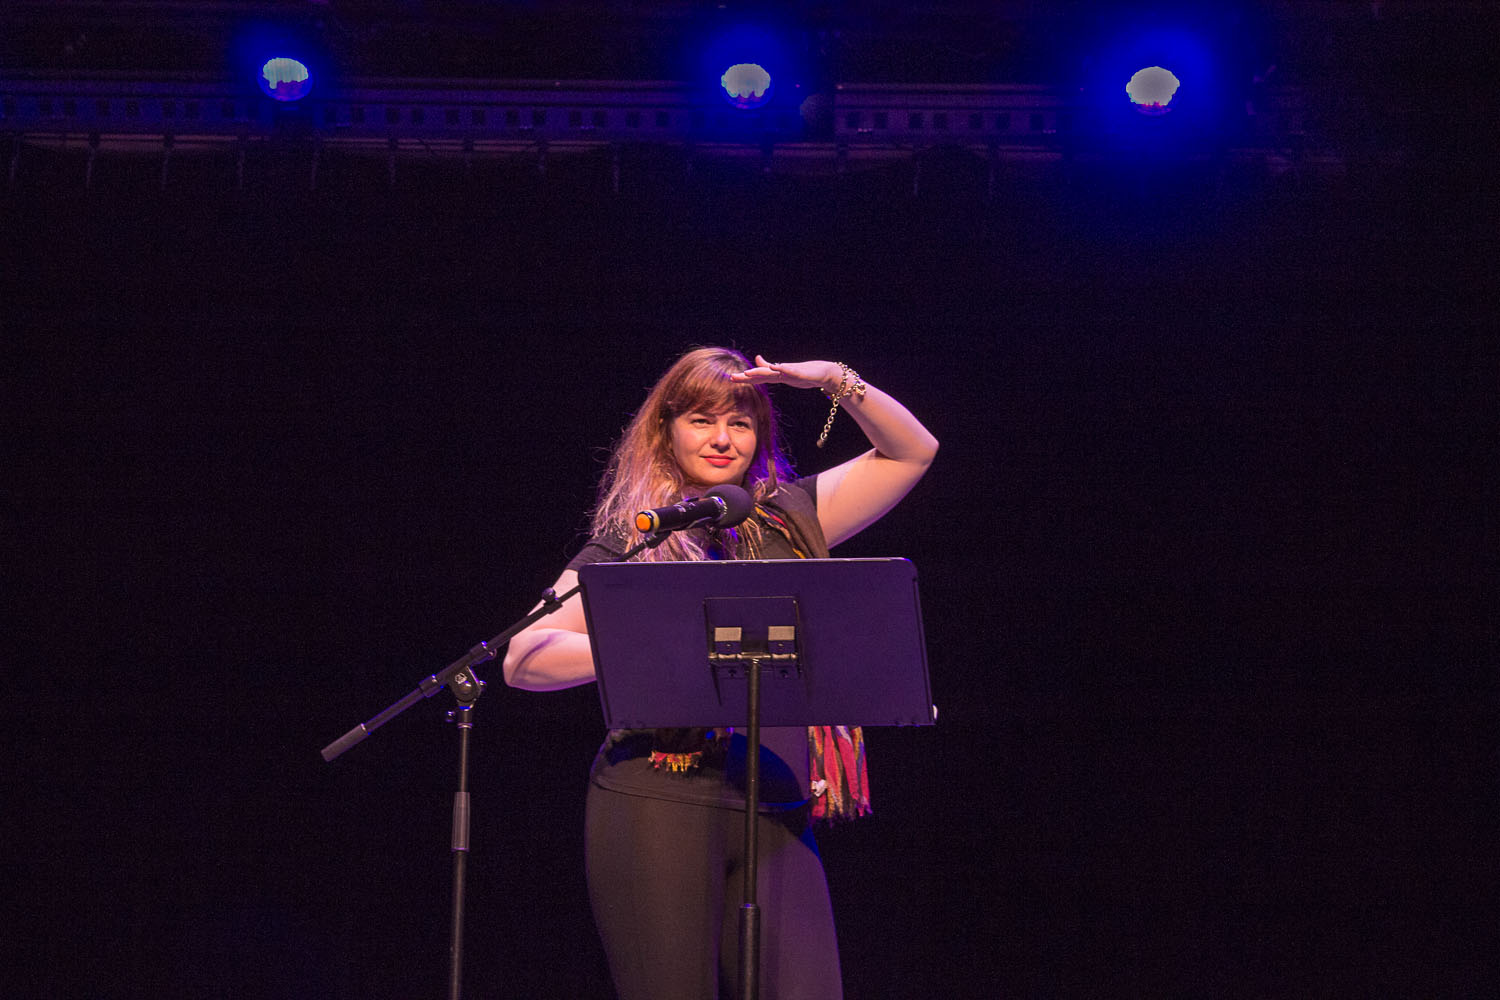 Actress and poet Amber Tamblyn looking for an audience participant for her dare, a lap dance and journal reading.